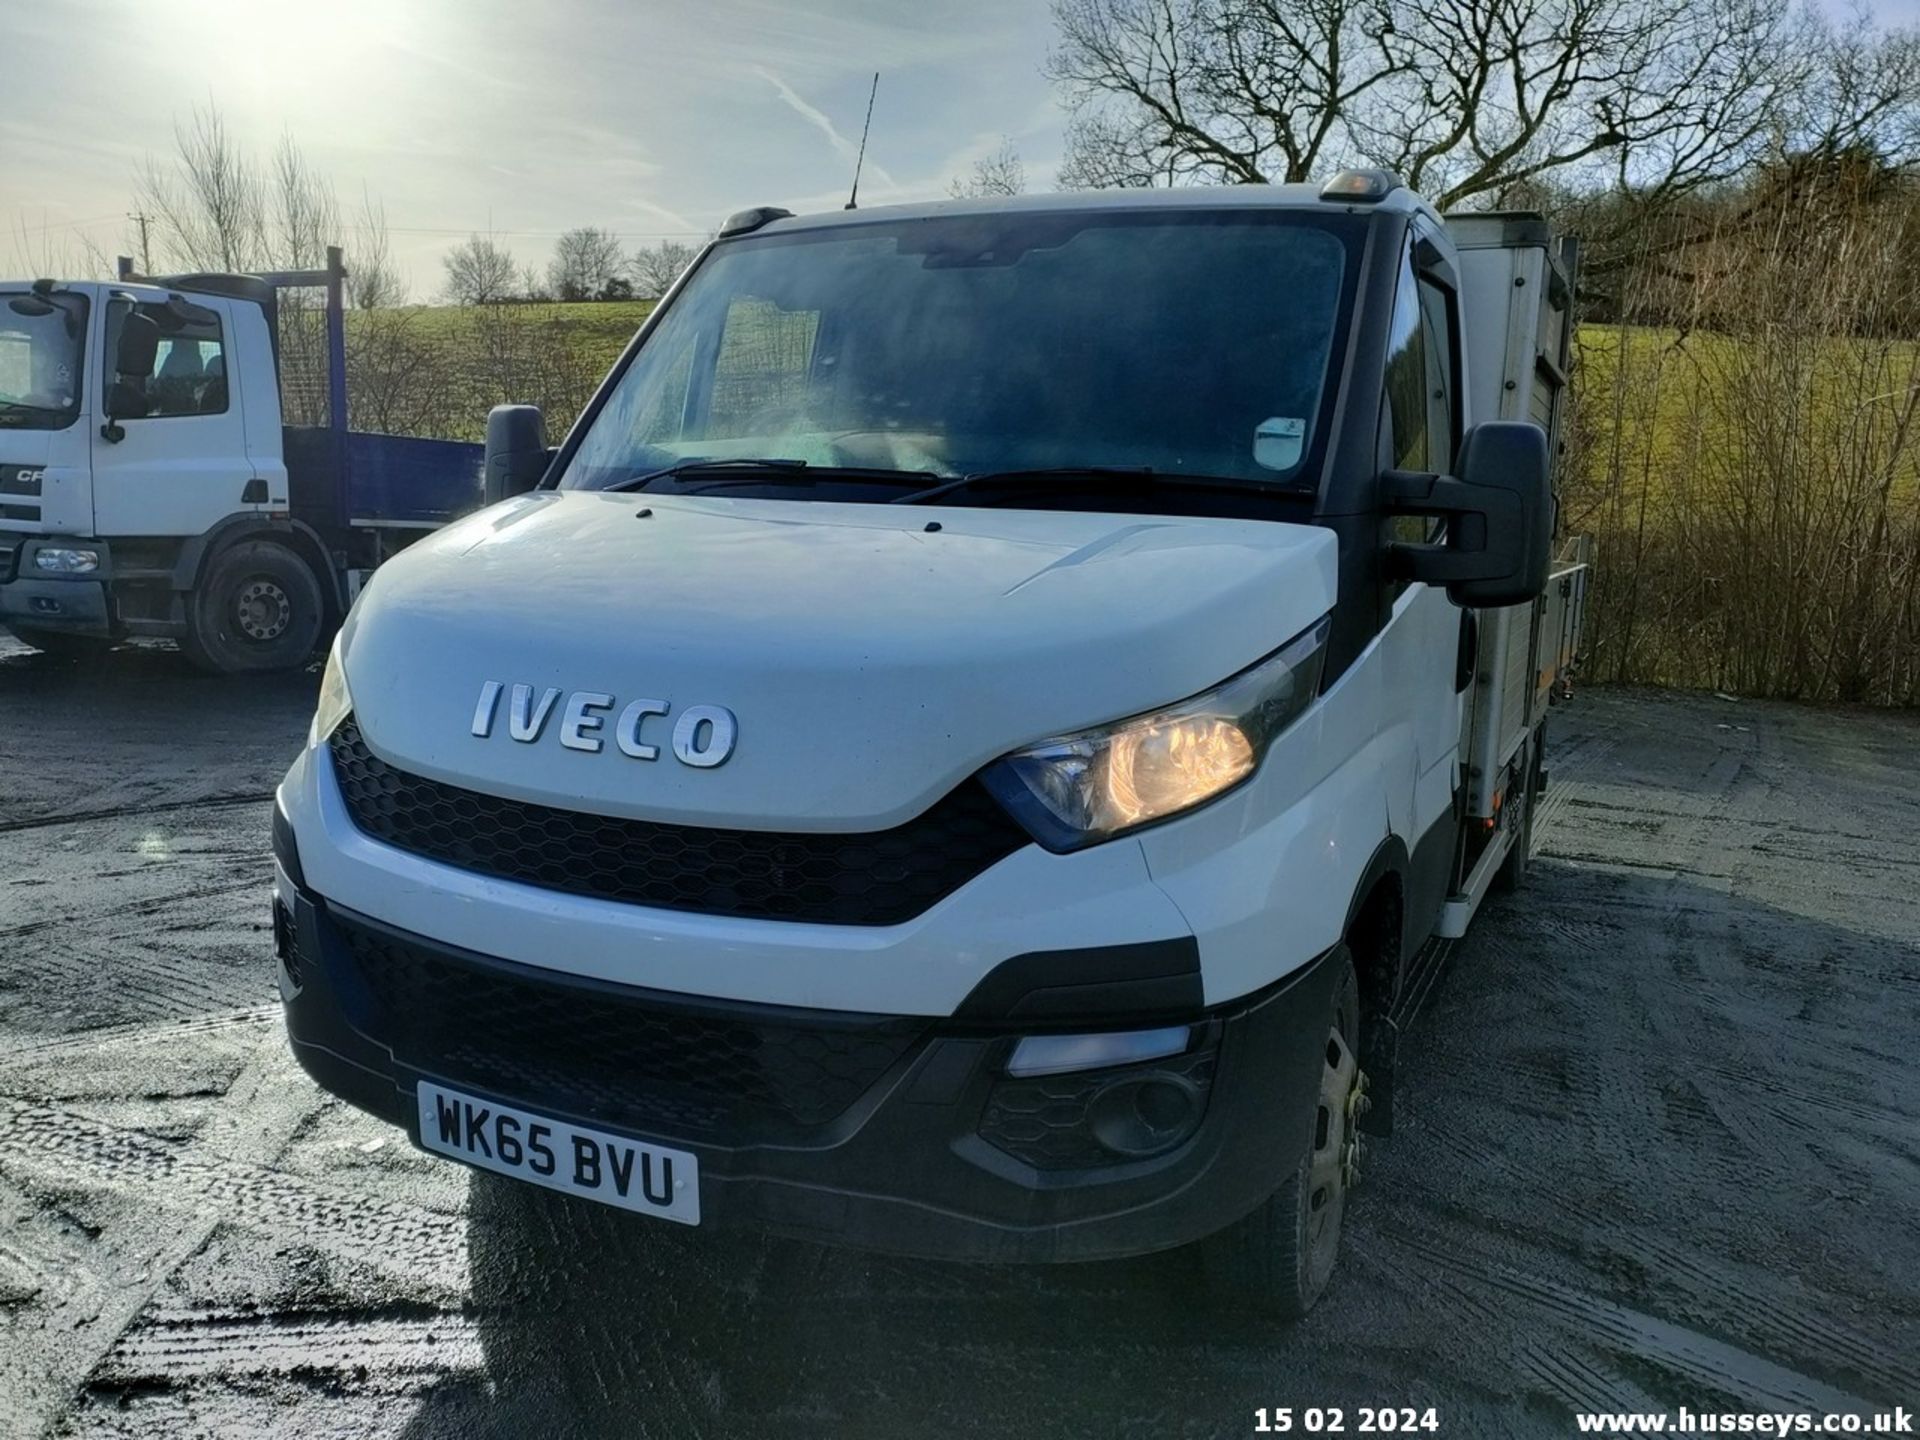 15/65 IVECO DAILY 35S11 MWB - 2998cc 2dr Tipper (White) - Image 10 of 38